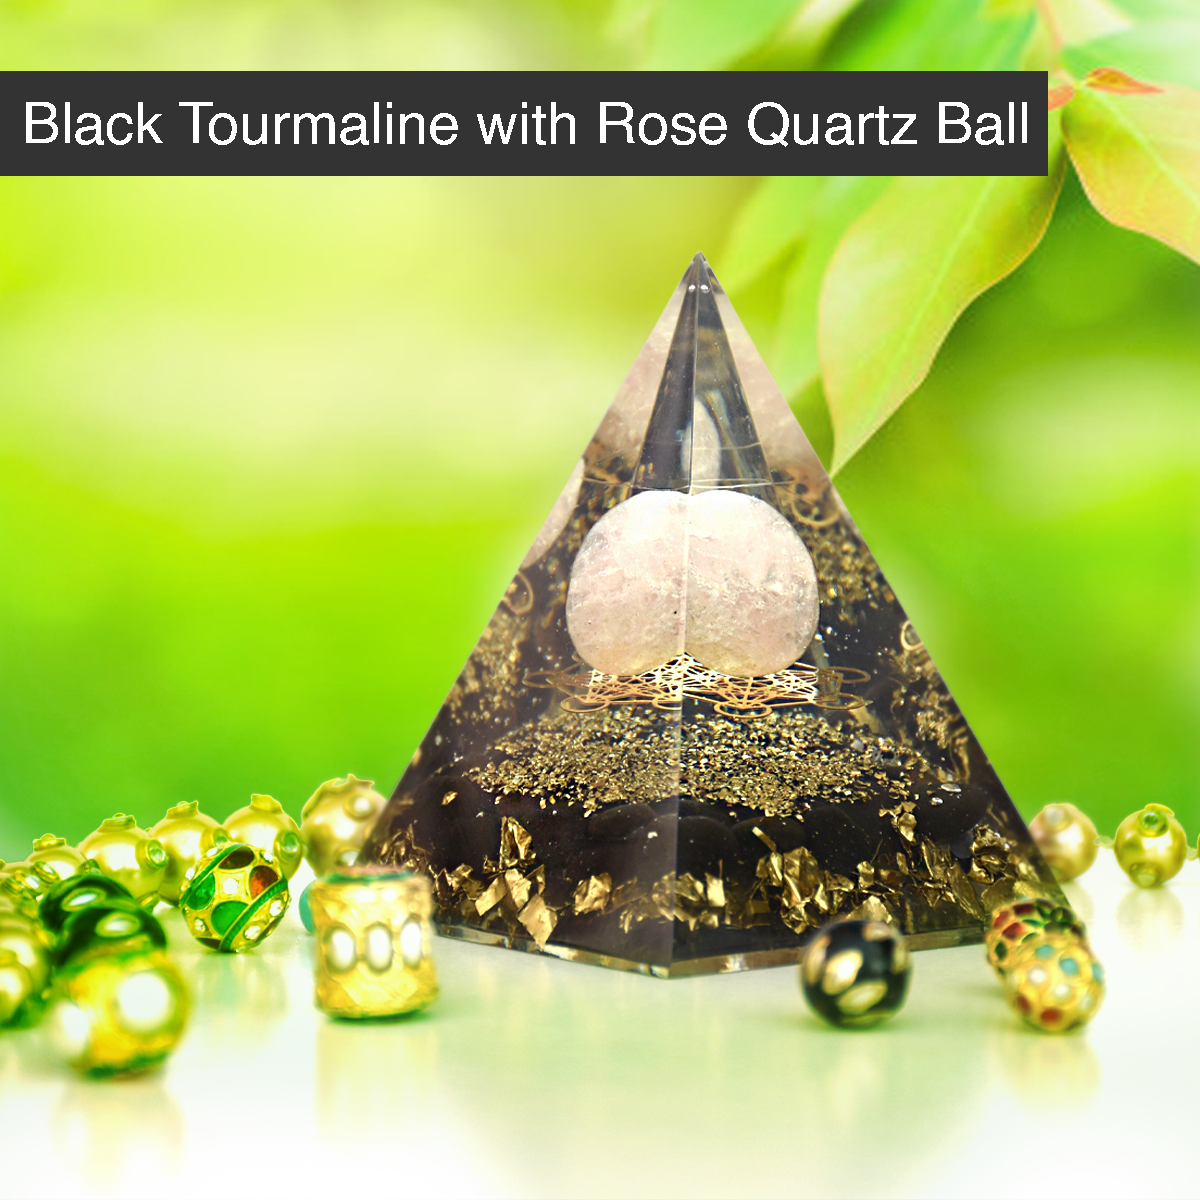 Tranquil Rose Aura Ensemble Containing Rose Quartz Tree, Black Obsidian with Rose Quartz Ball Pyramid and Soya Wax Candle for Gifting